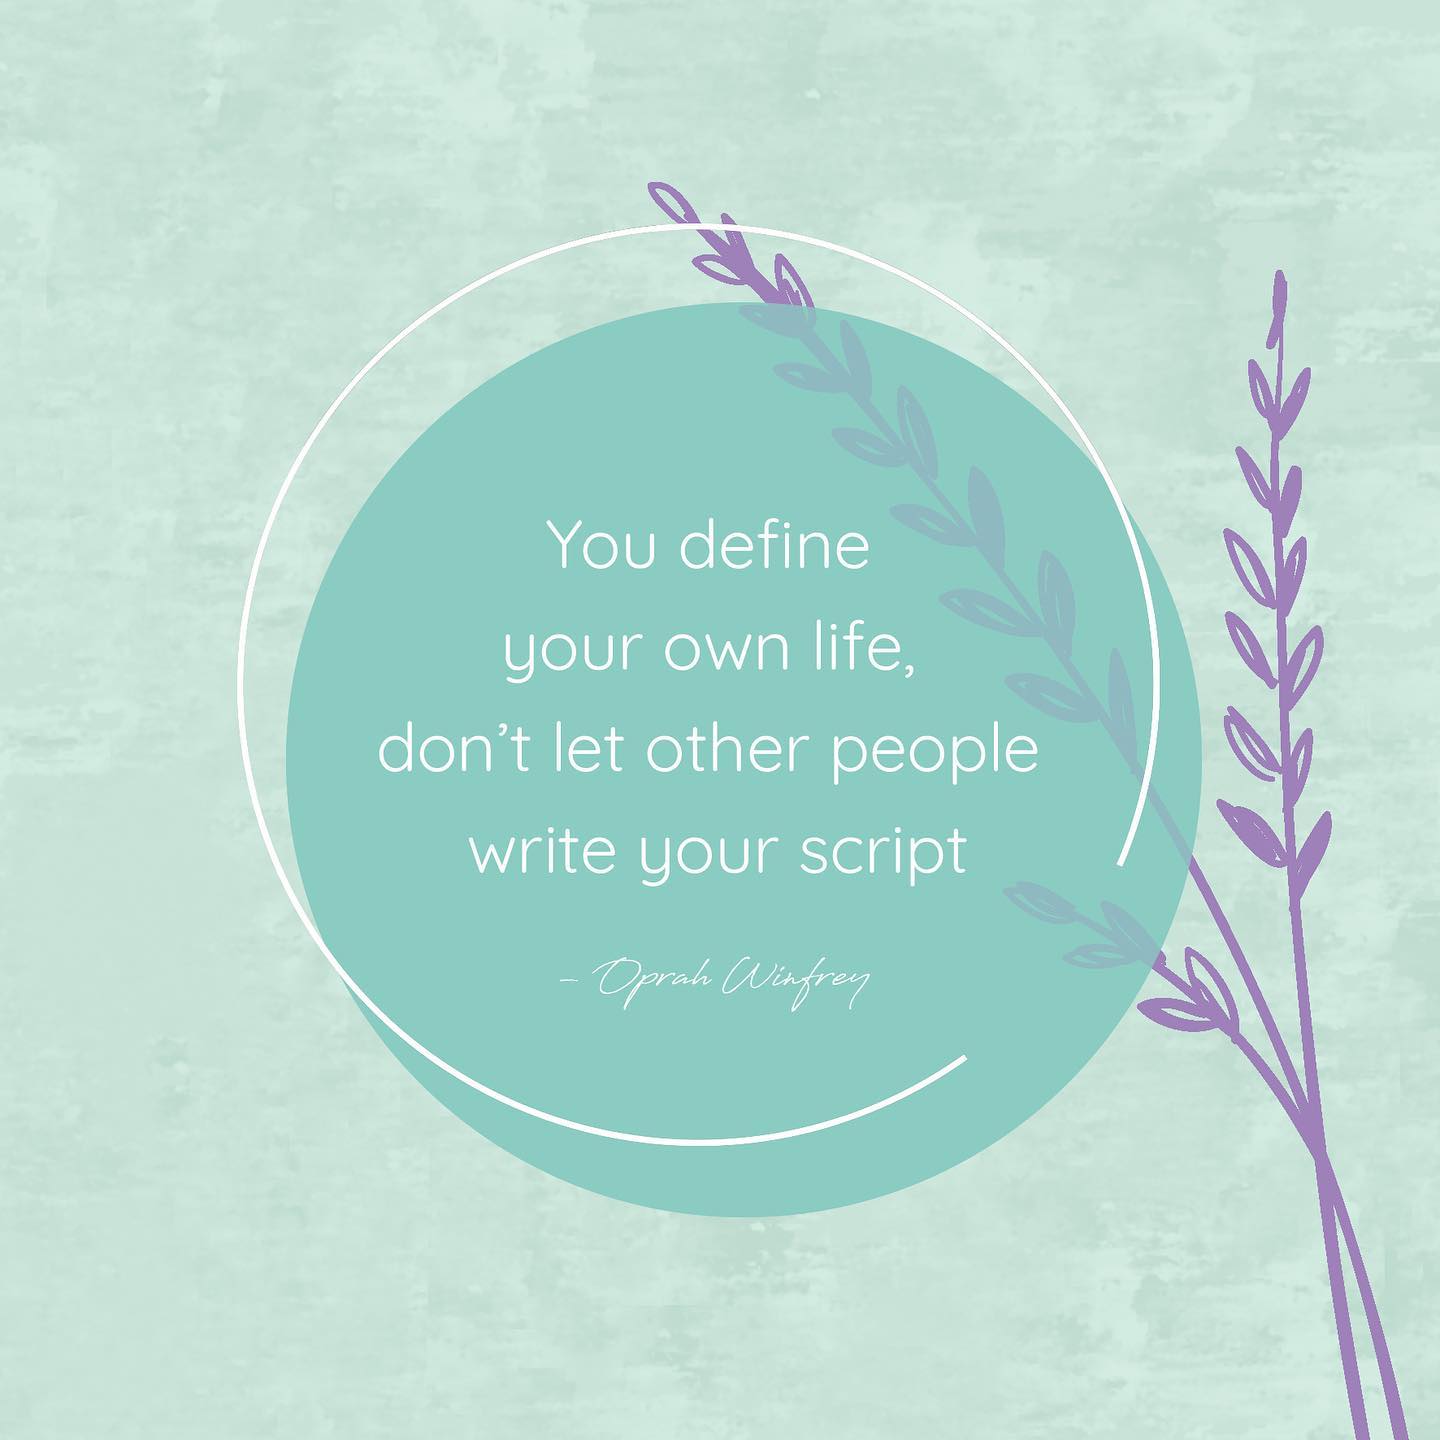 “You define your own life. Don’t let other people write your script.”